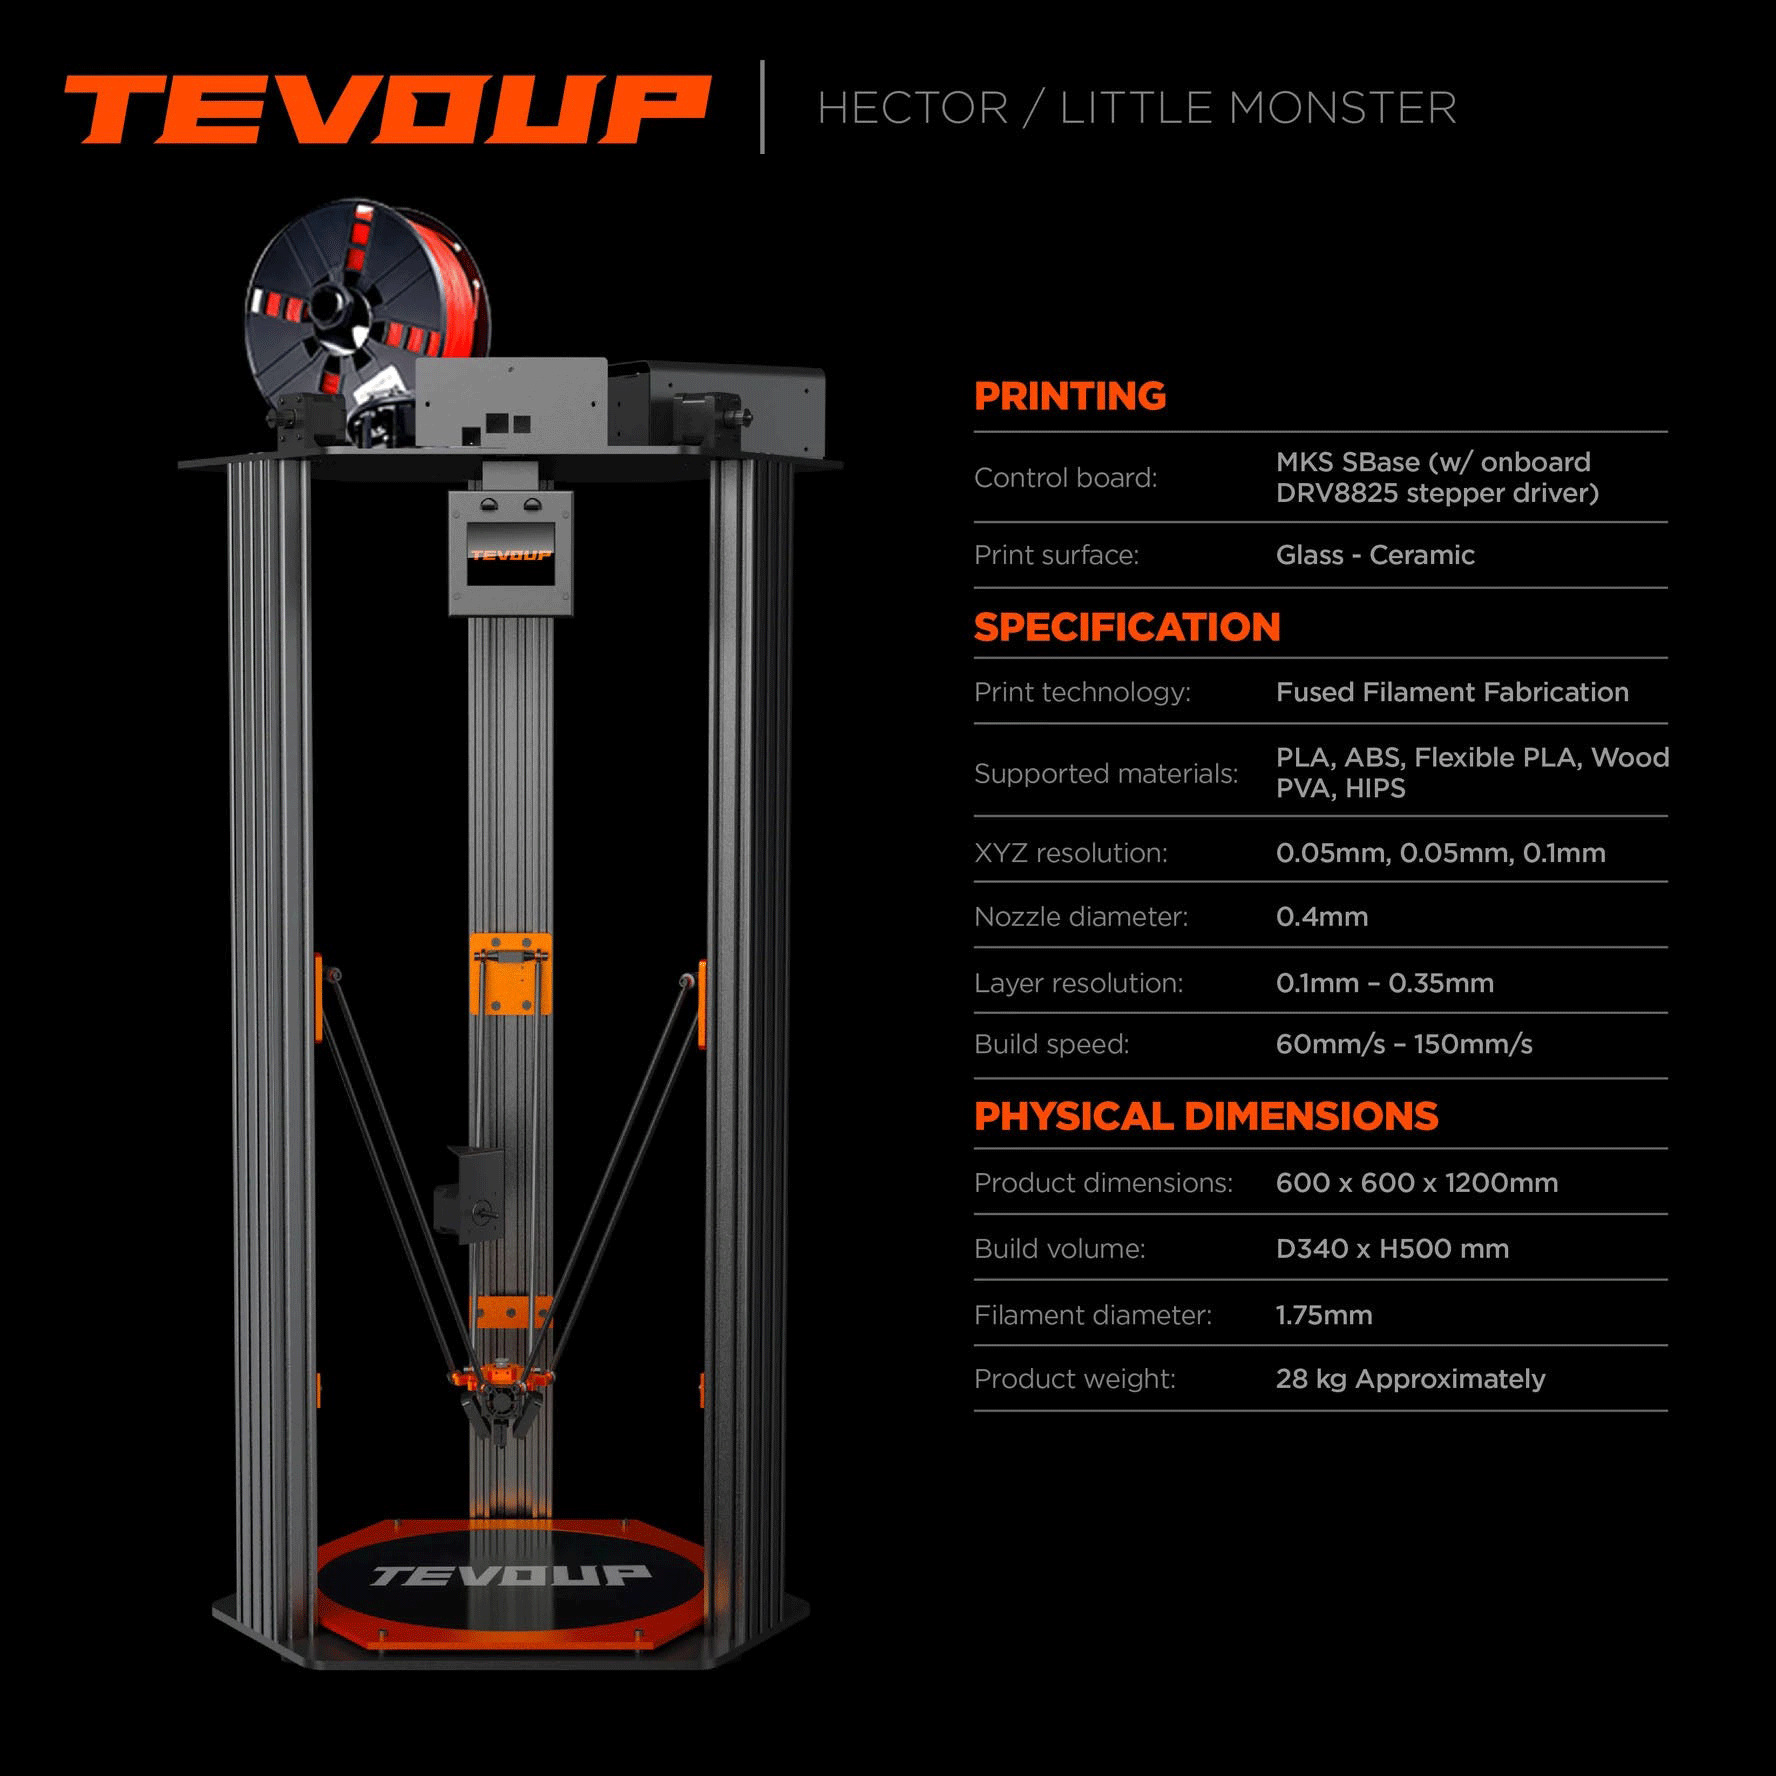 TEVOUP Little Monster Delta 3D Printer, Print Speed Max 300 mm/s, Auto Leveling, Titan Extruder with Volcano nozzle, Full CNC Structure, 80% Pre-assembled,  Prints PLA ABS Flexible PLA HIPS WOOD PVA Nylon, Build Size 340*500mm